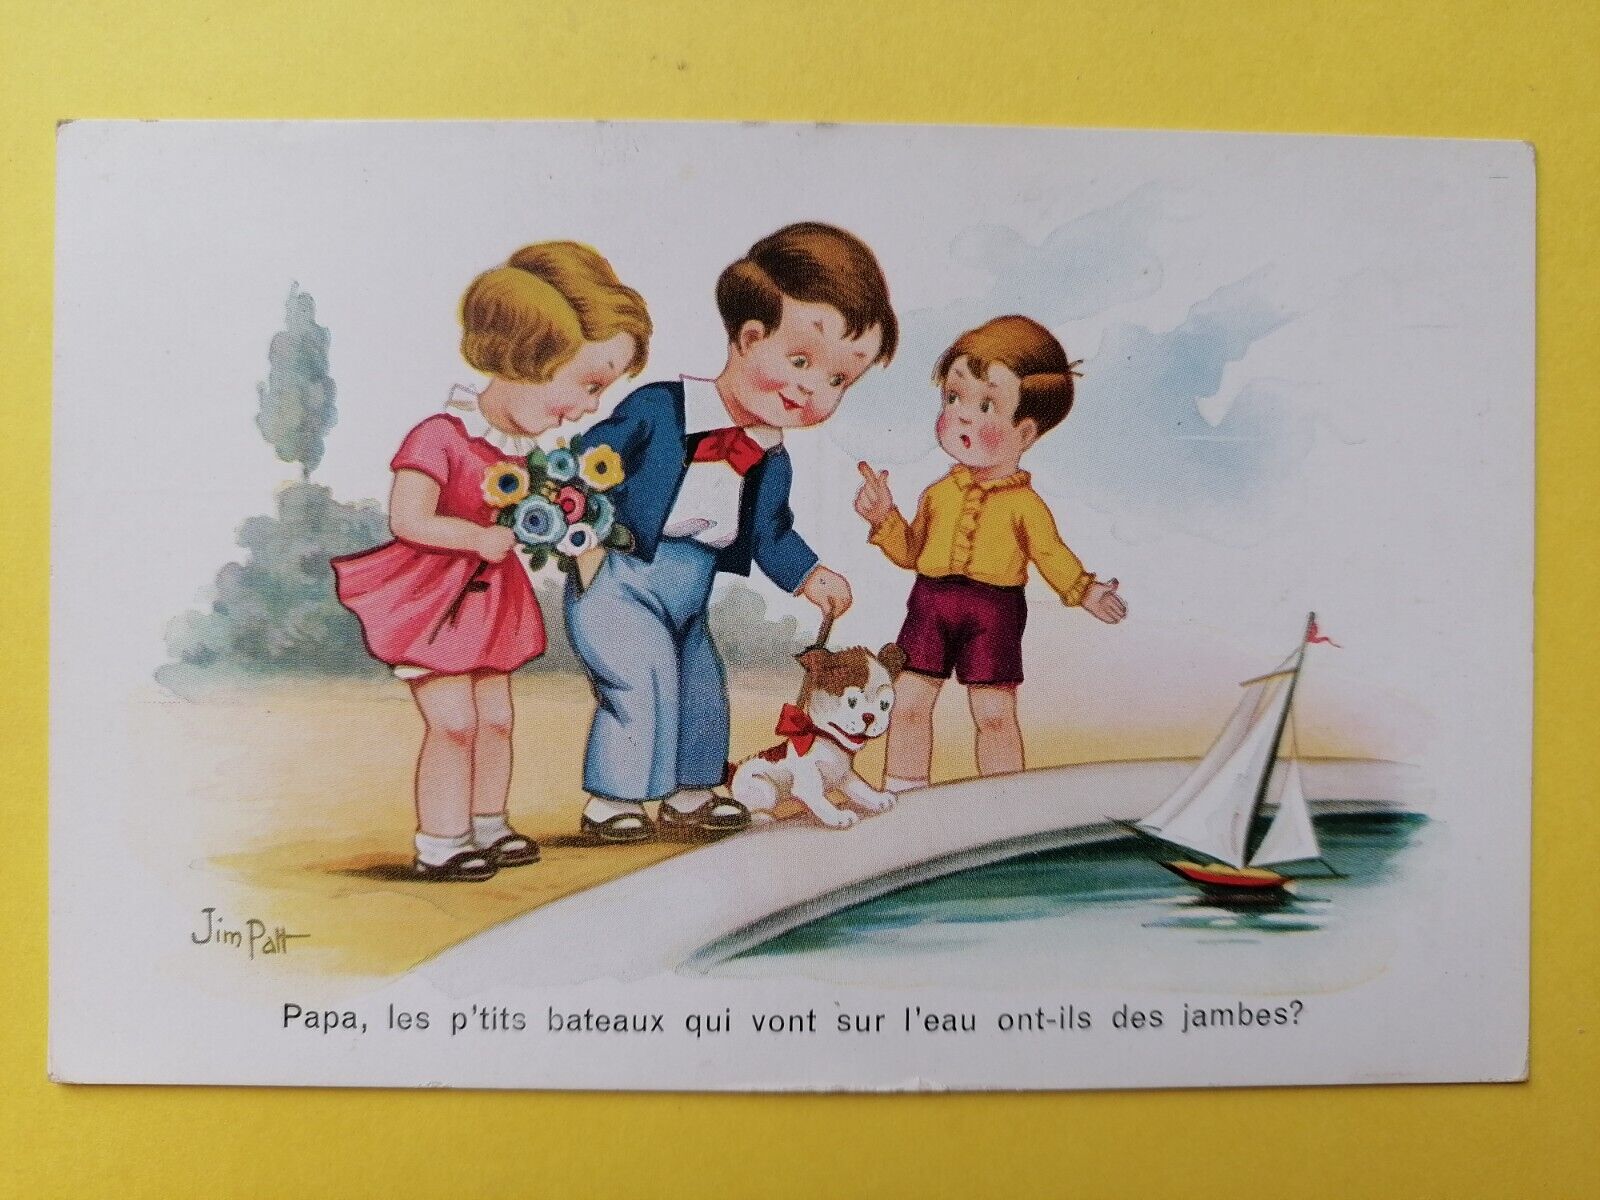 CPA HUMOR DRAWING Signed Jim PATT DAD, Do Little BOATS Have LEGS?